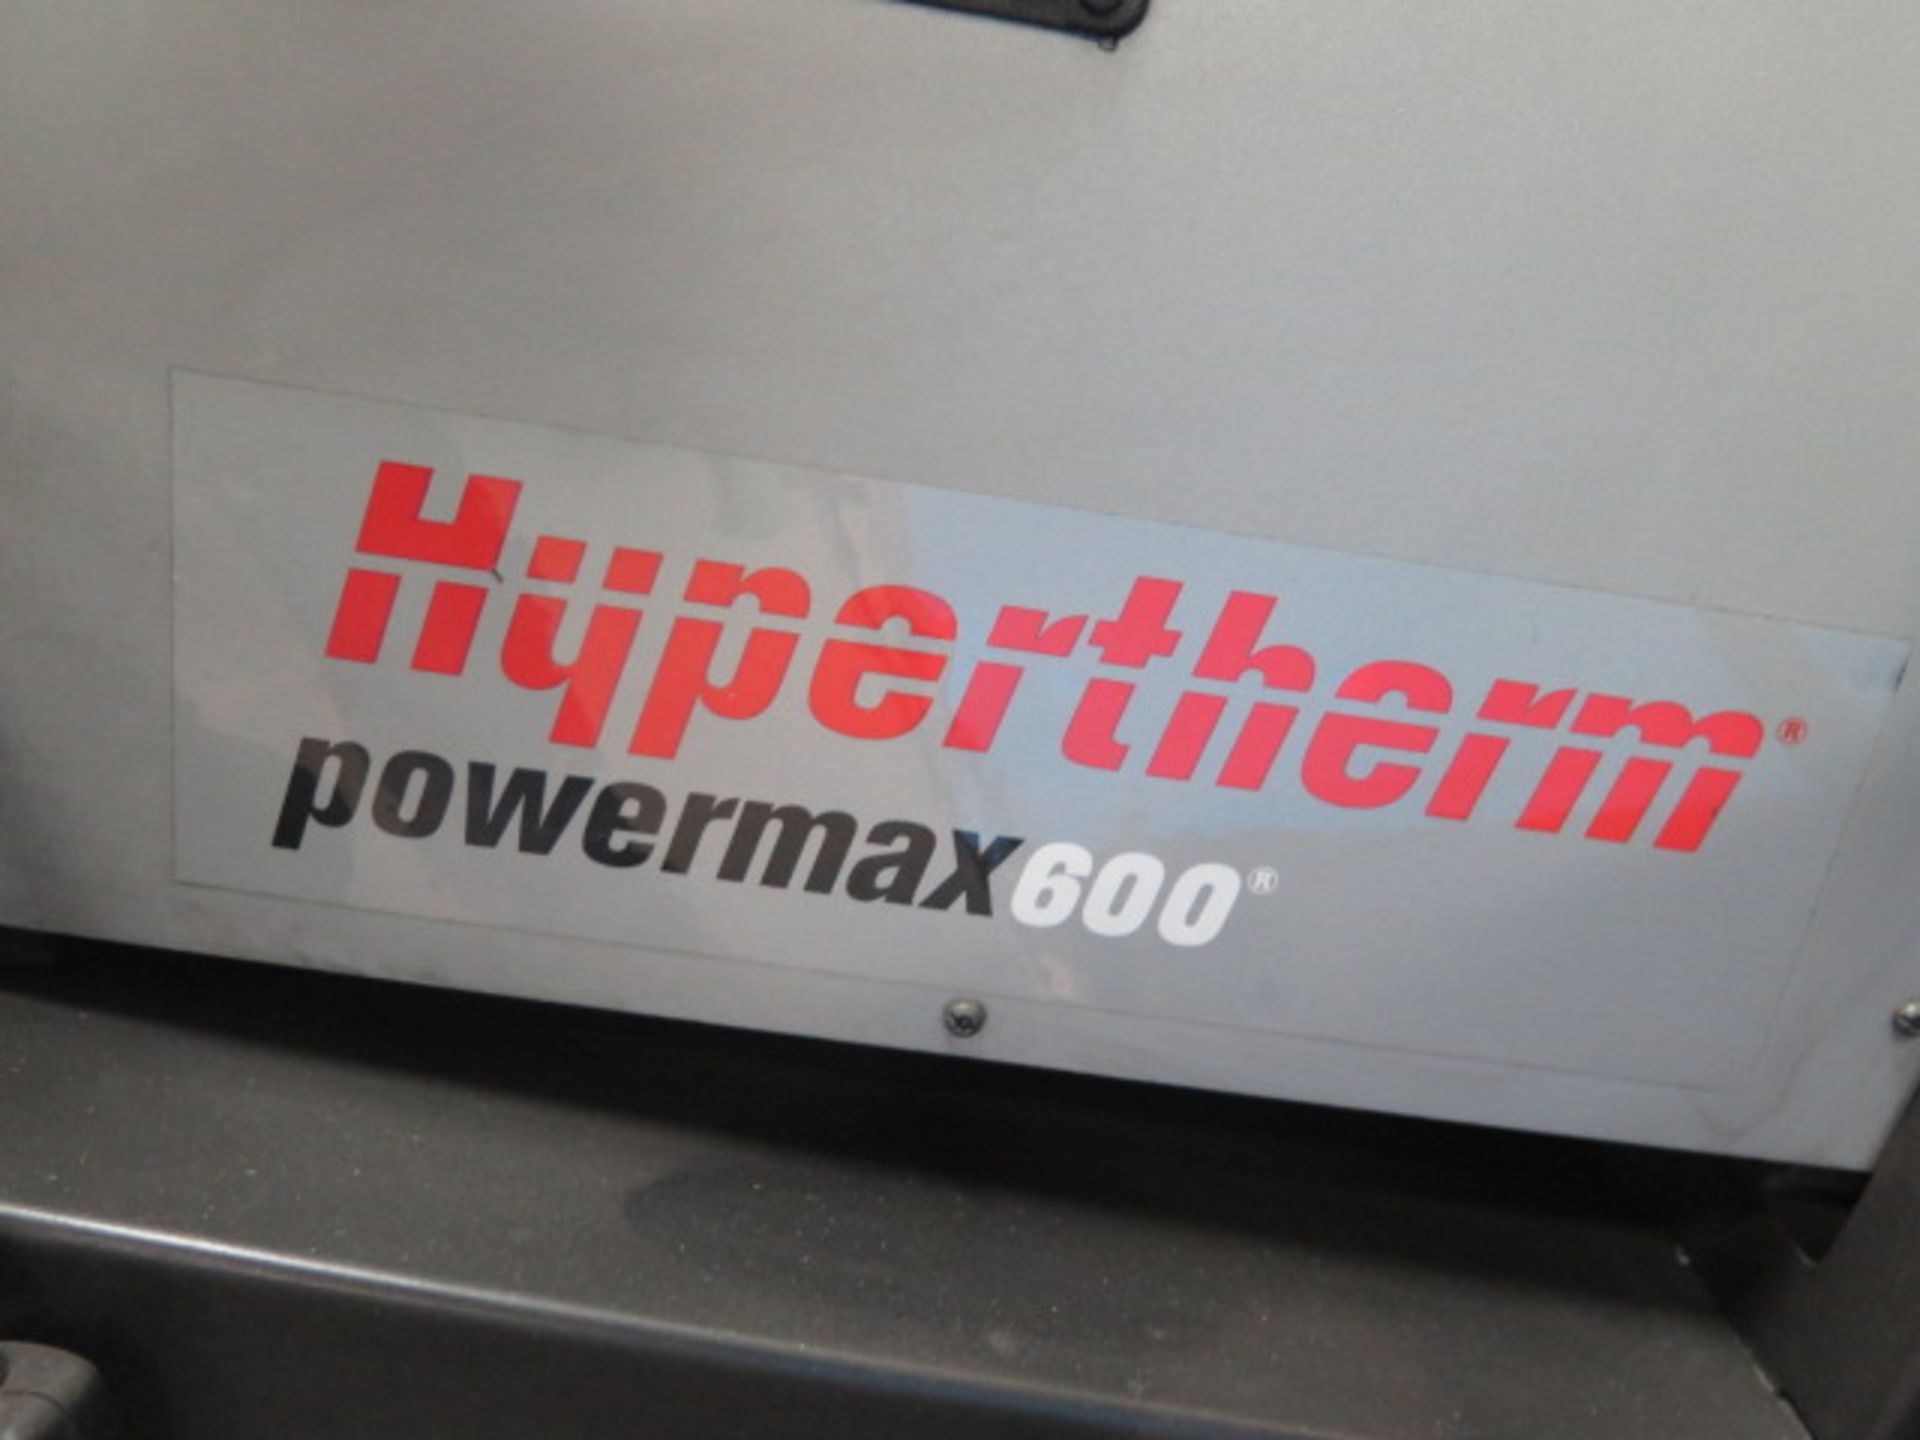 Hypertherm Powermax 600 Plasma Cutting Power Source w/ Cart (SOLD AS-IS - NO WARRANTY) - Image 4 of 9